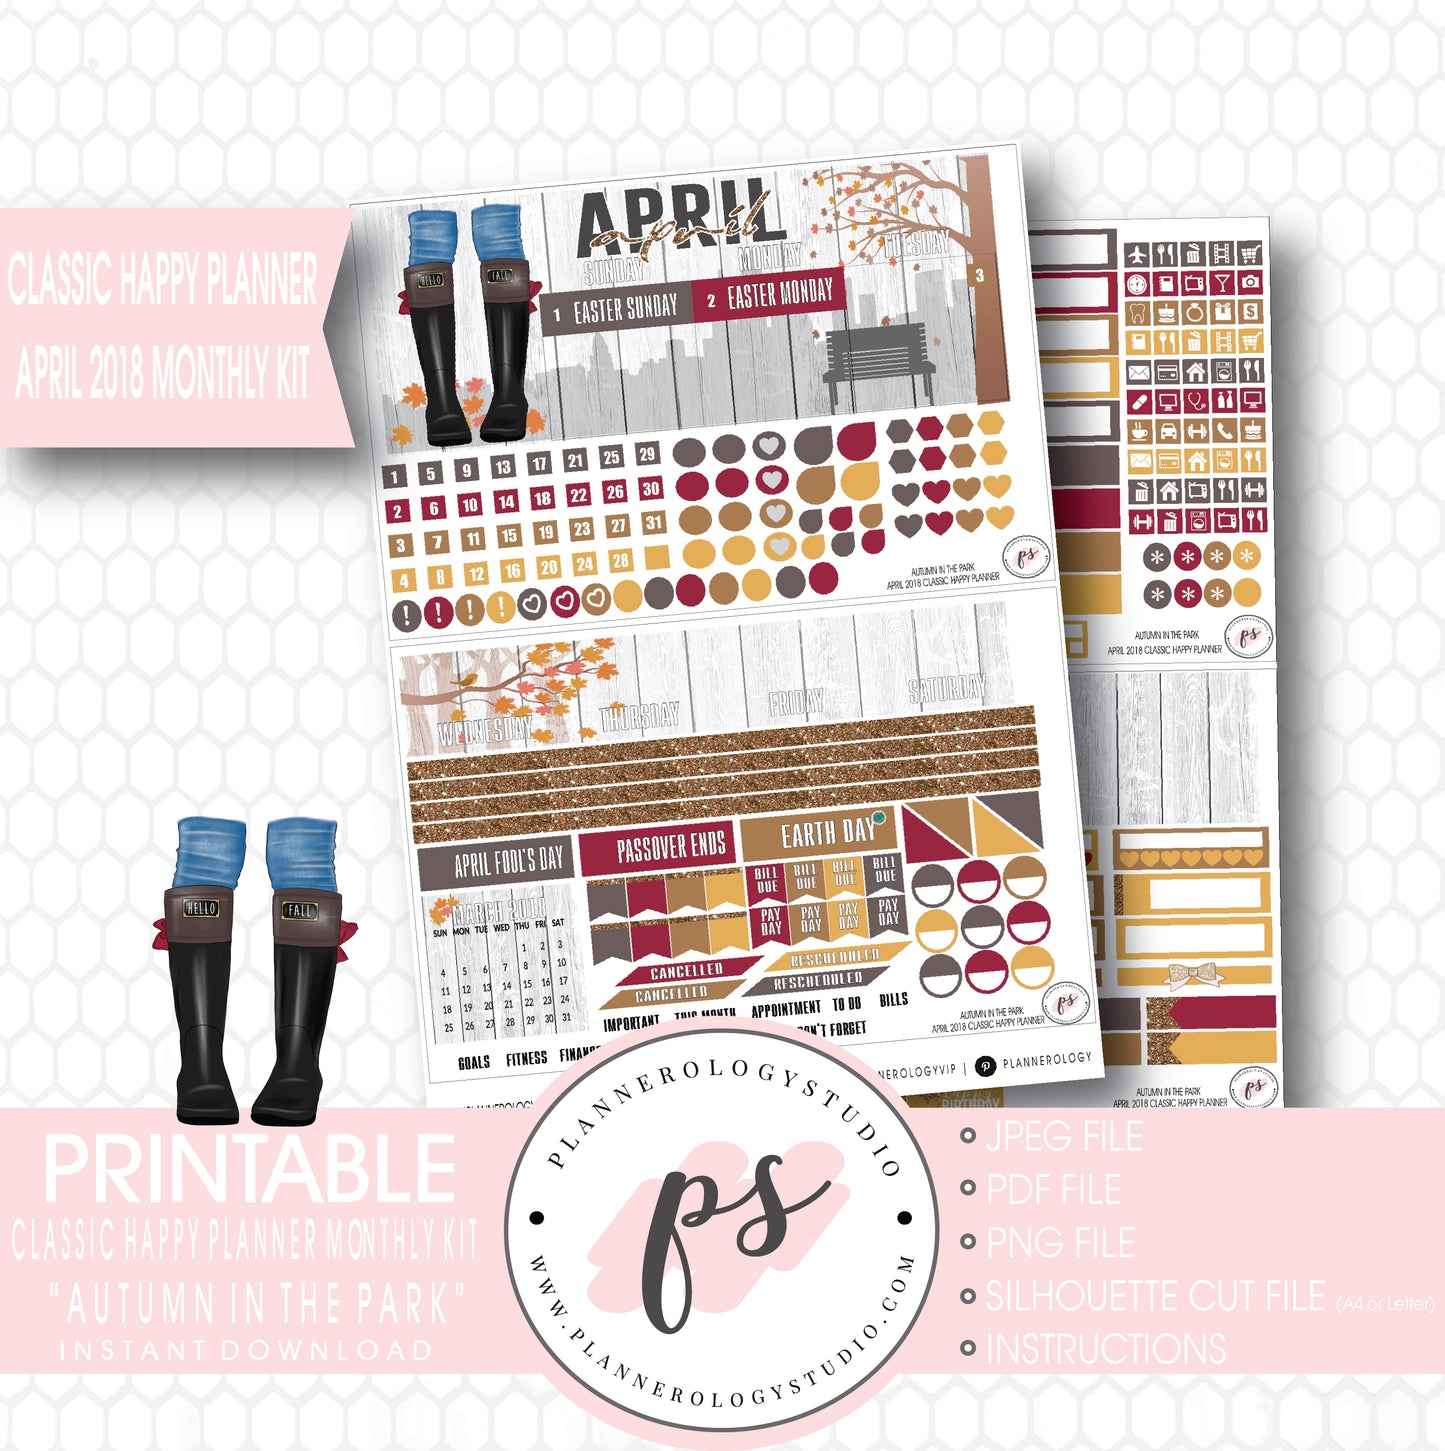 Autumn in the Park April 2018 Monthly View Kit Digital Printable Planner Stickers (for use with Classic Happy Planner) - Plannerologystudio